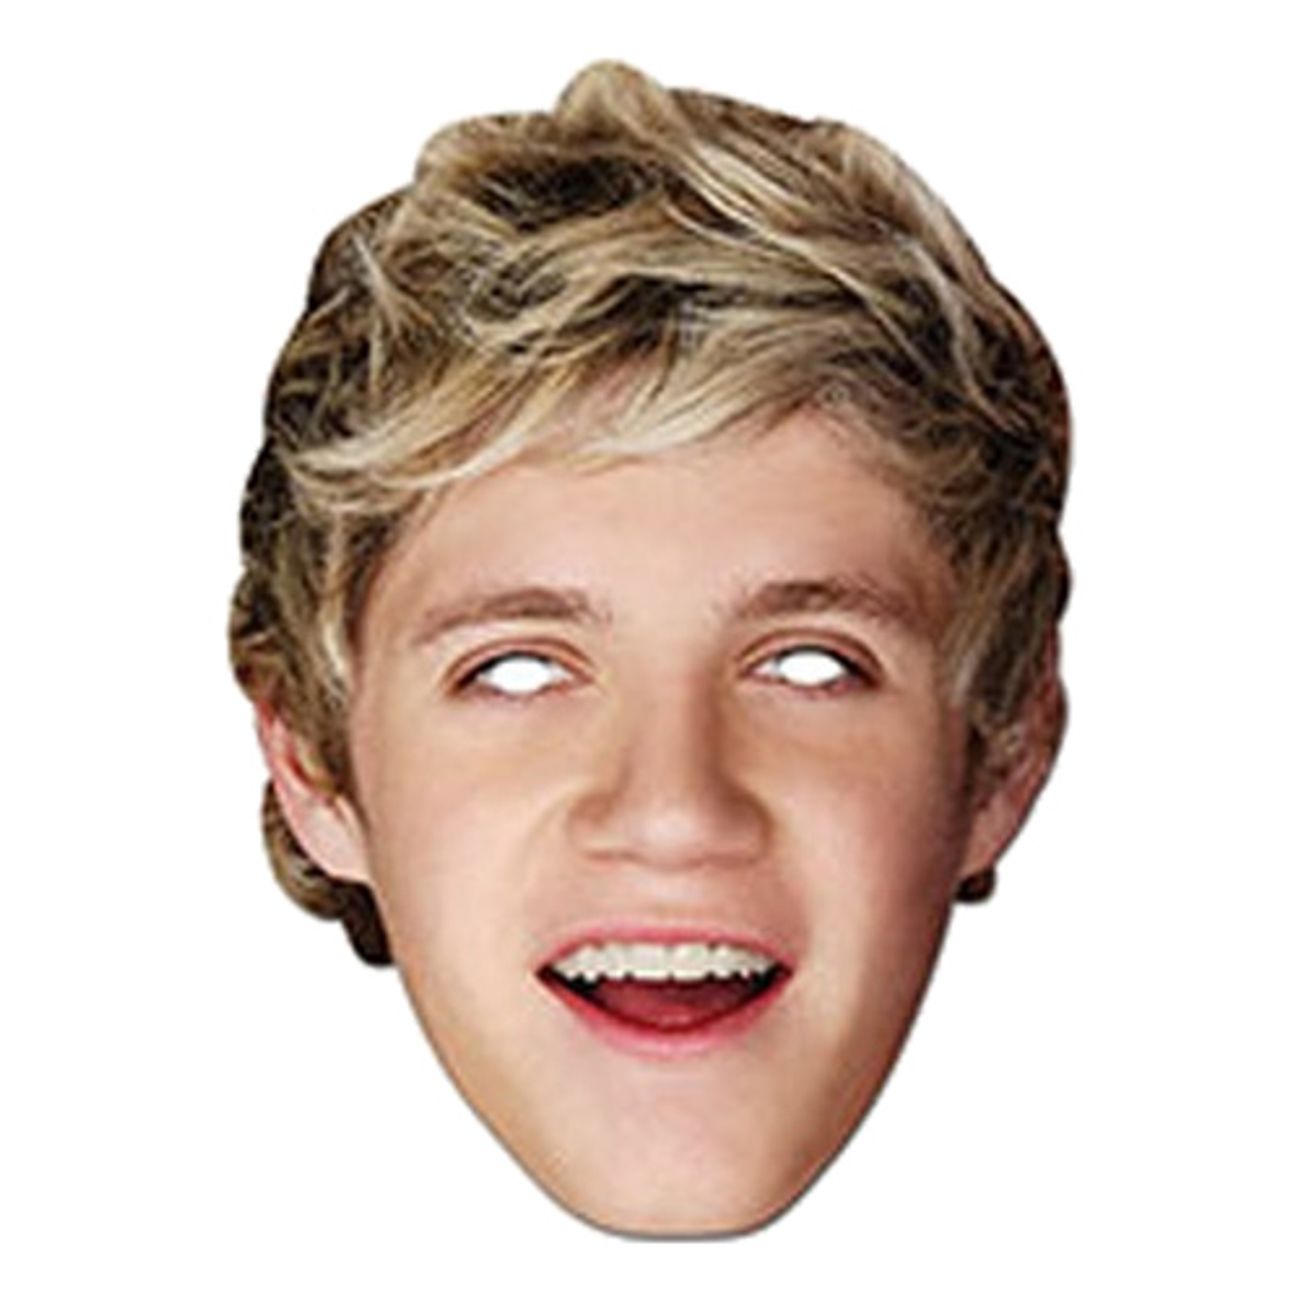 niall-horan-pappmask-1